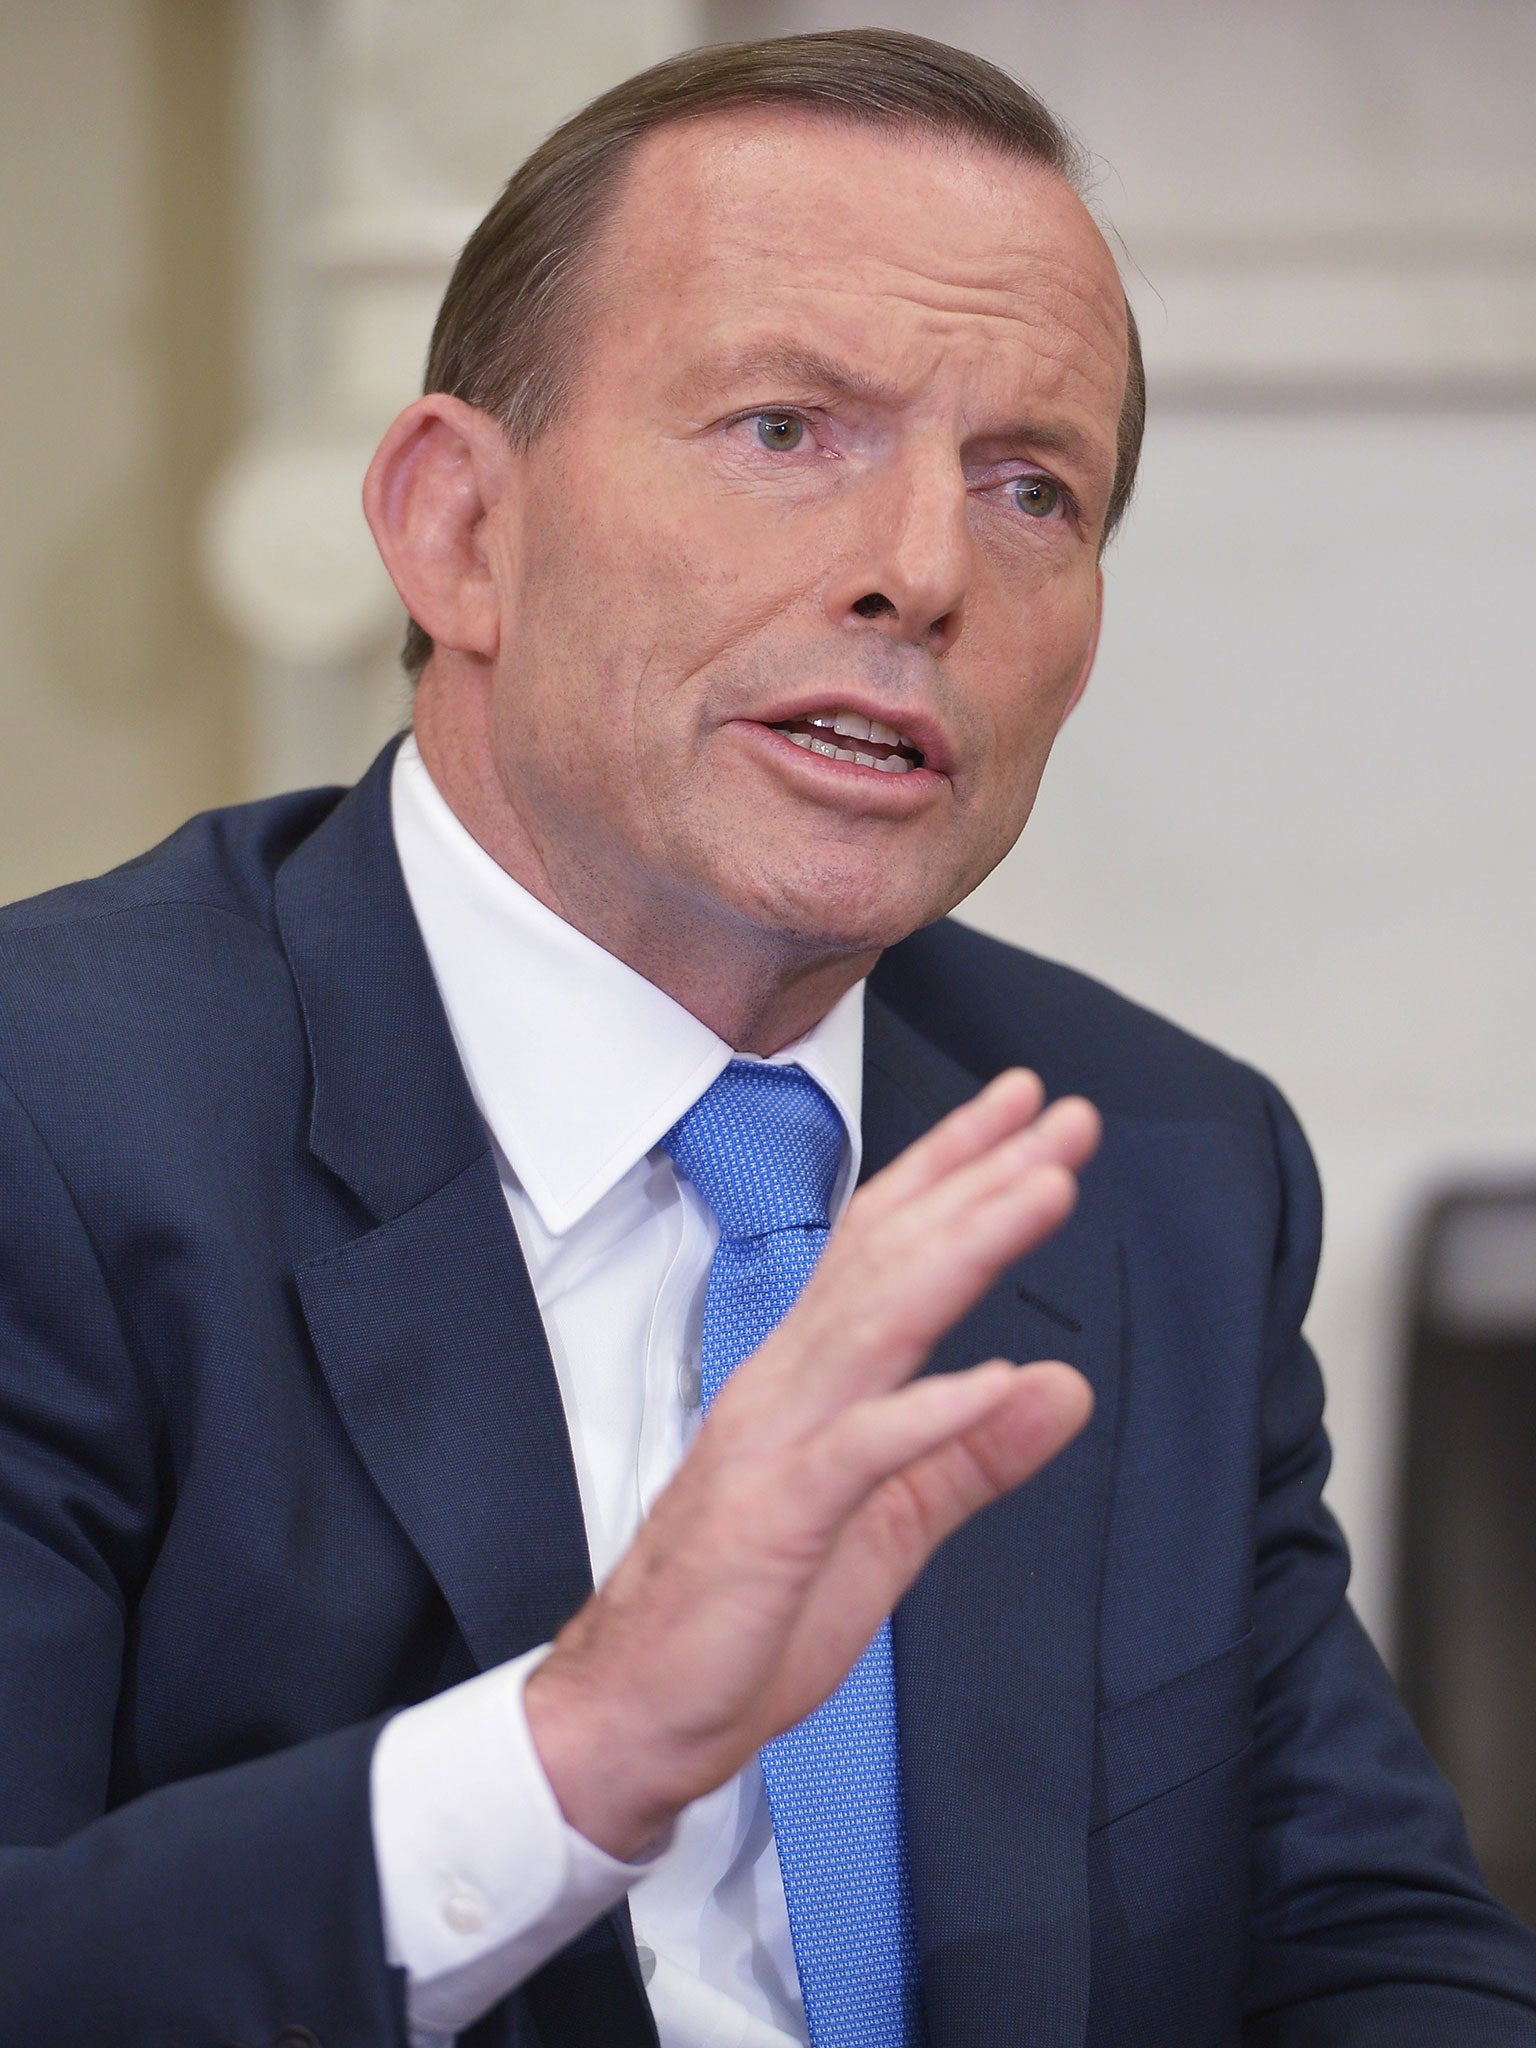 Tony Abbott has pledged to end the ‘age of entitlement’